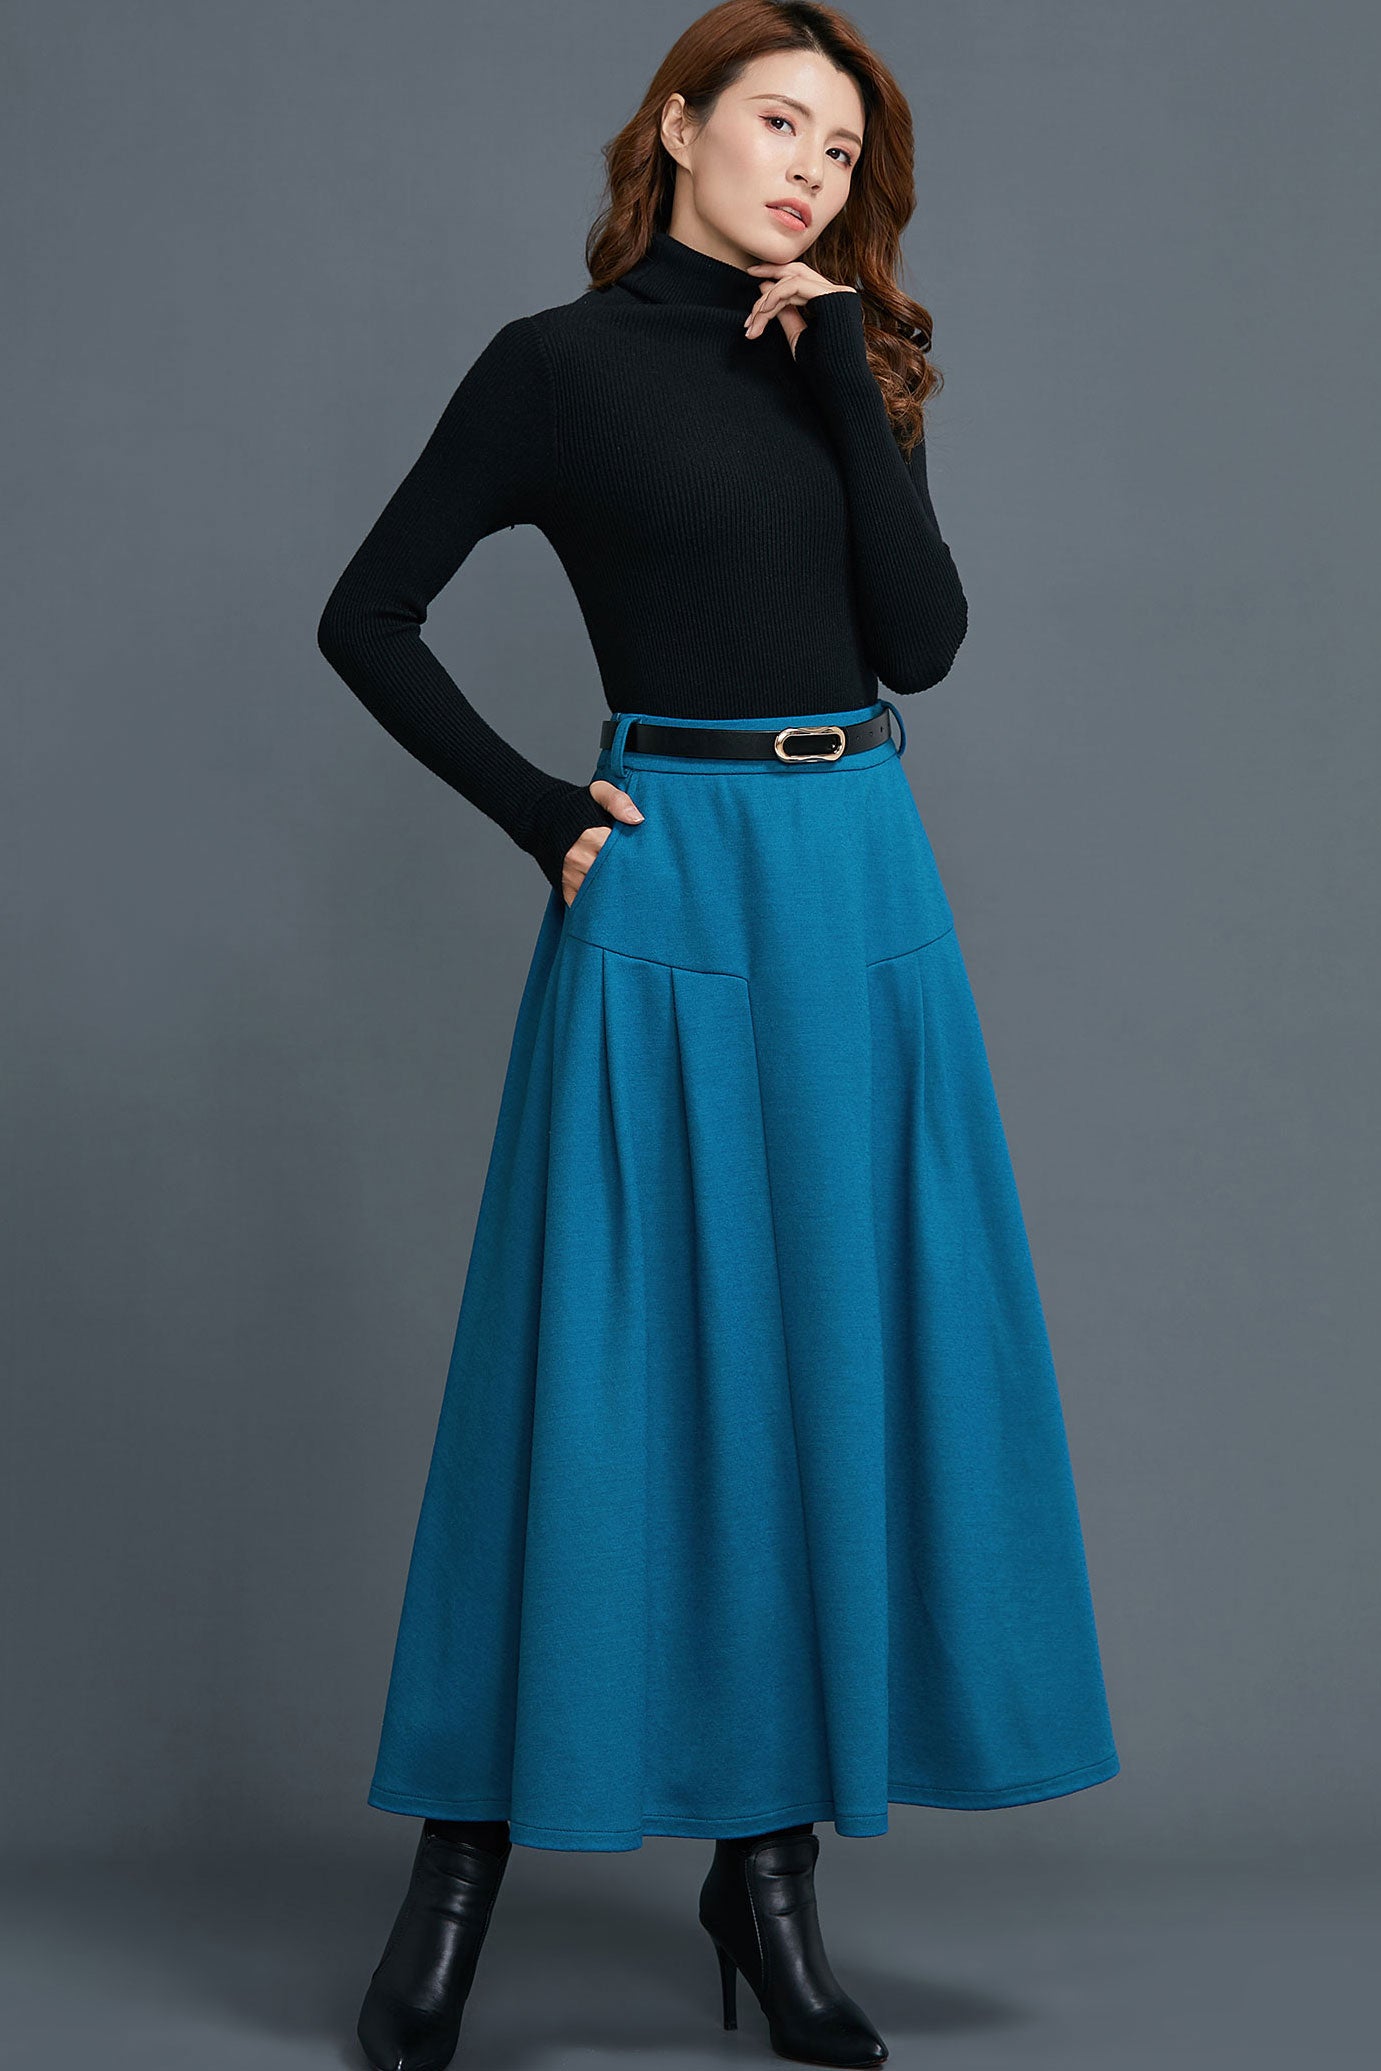 pleated Winter Wool Skirt with Pockets c1662 XS#yy05469